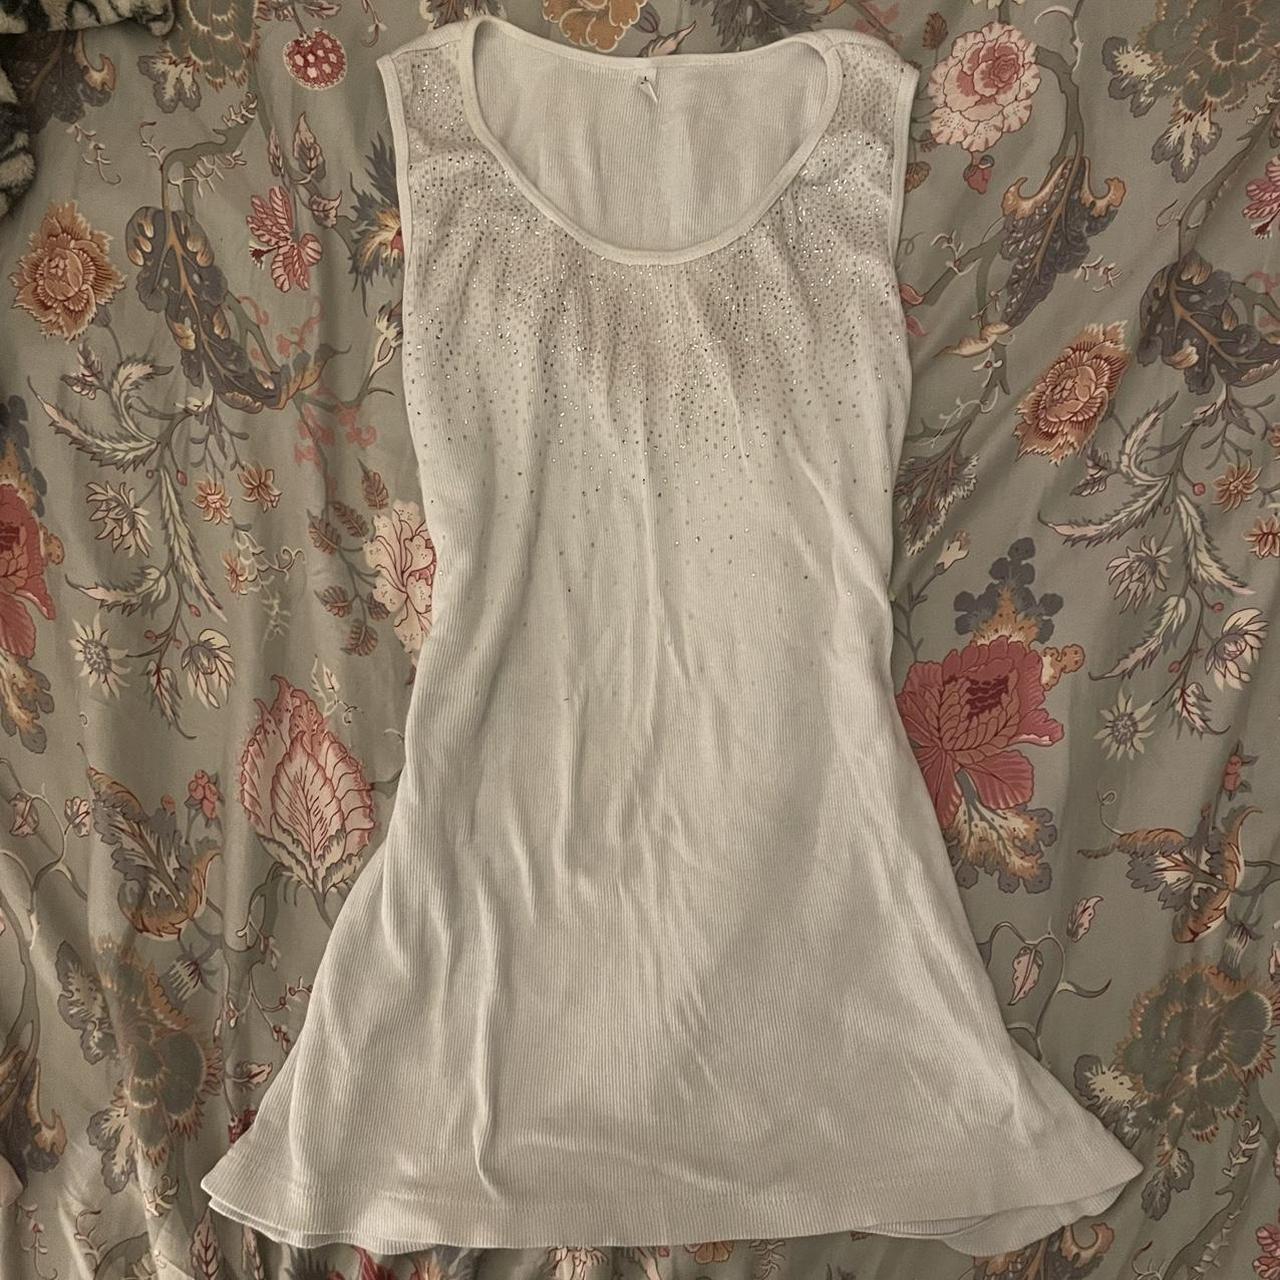 Sparkly white top. The size isn’t there but I would... - Depop